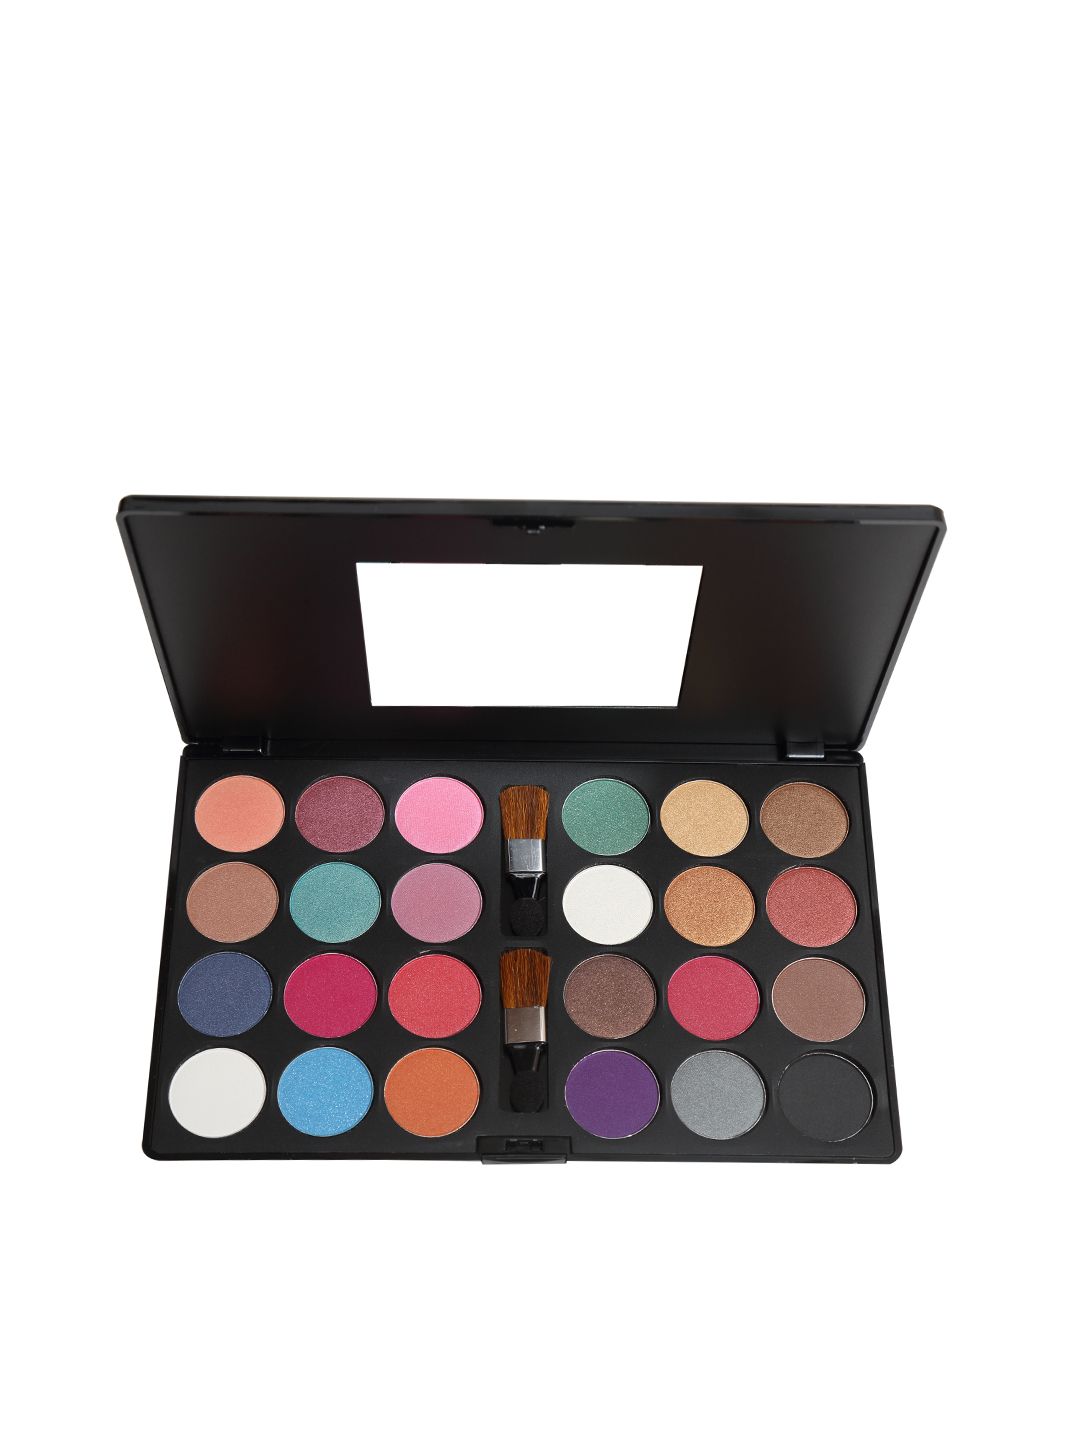 Miss Claire 4 Professional Eyeshadow Palette 48 g Price in India